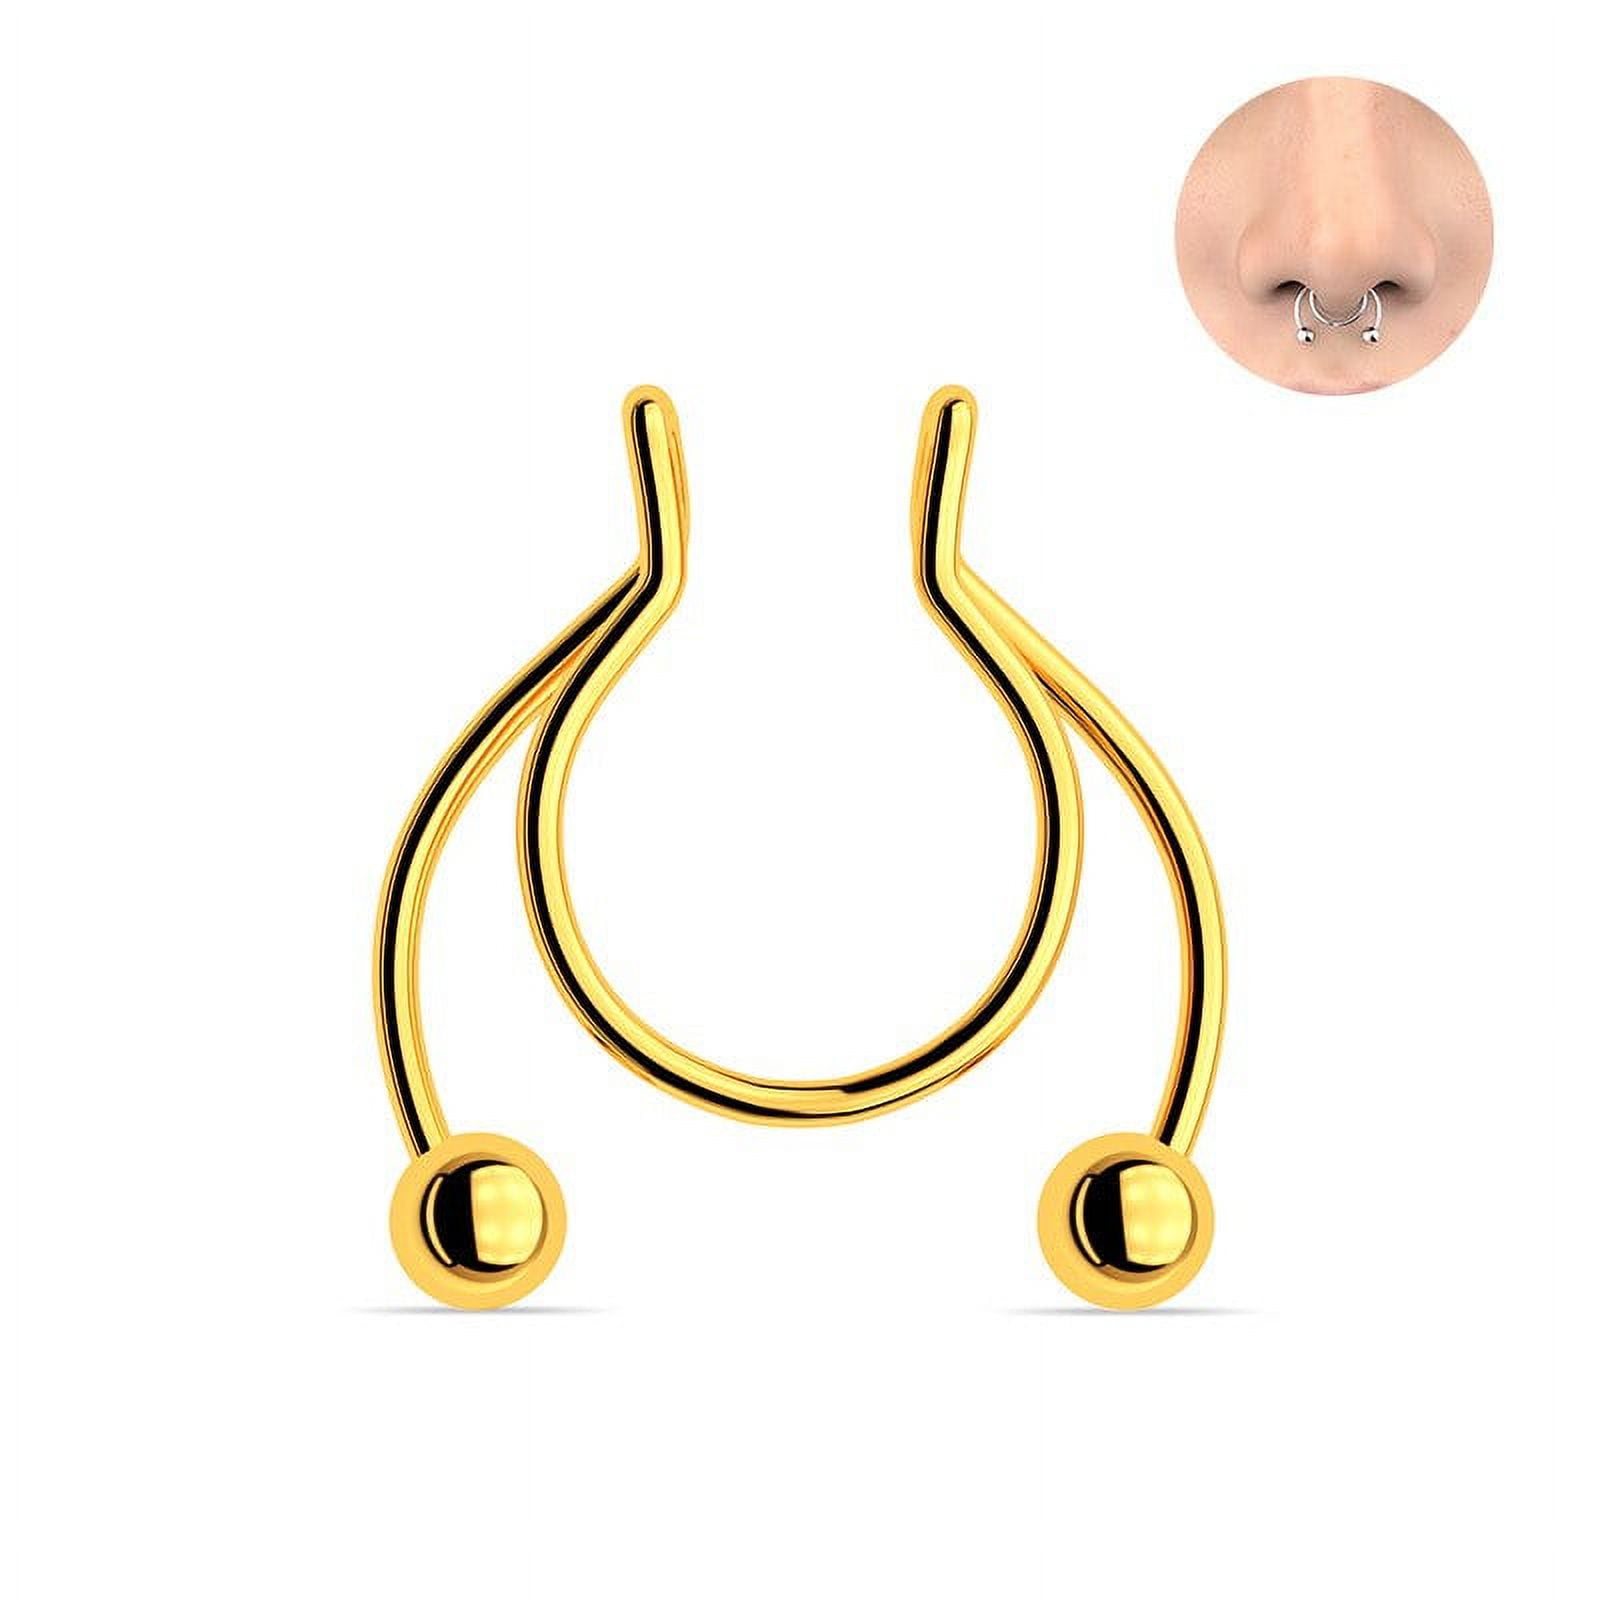 Dropship Fake Nose Ring Stud; Fake Septum Fake Nose Ring For Women Men;  Nose Cuff Non Piercing; Faux Clip On Nose Rings to Sell Online at a Lower  Price